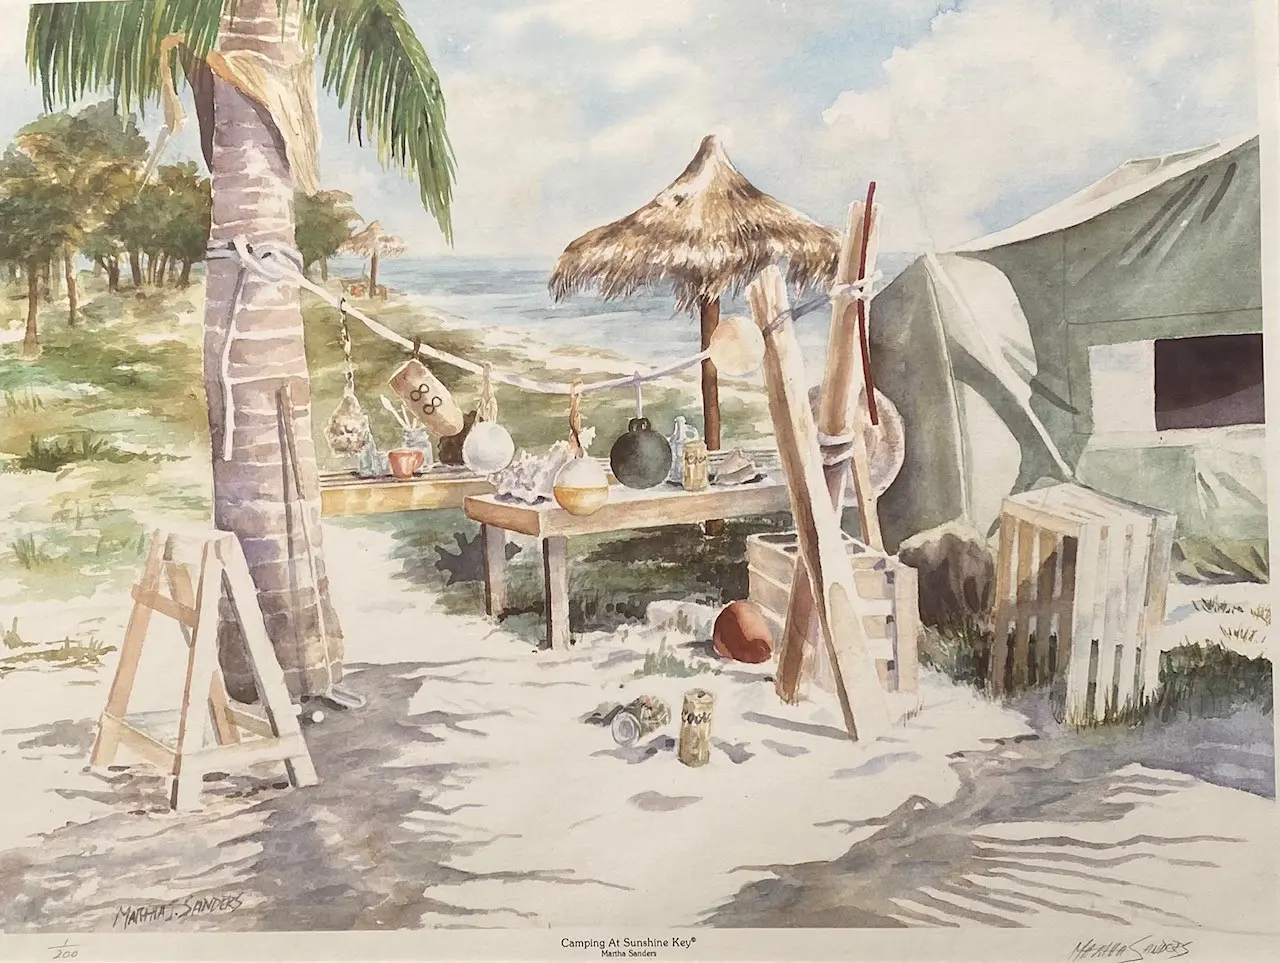 A painting of an outdoor setting with palm trees.